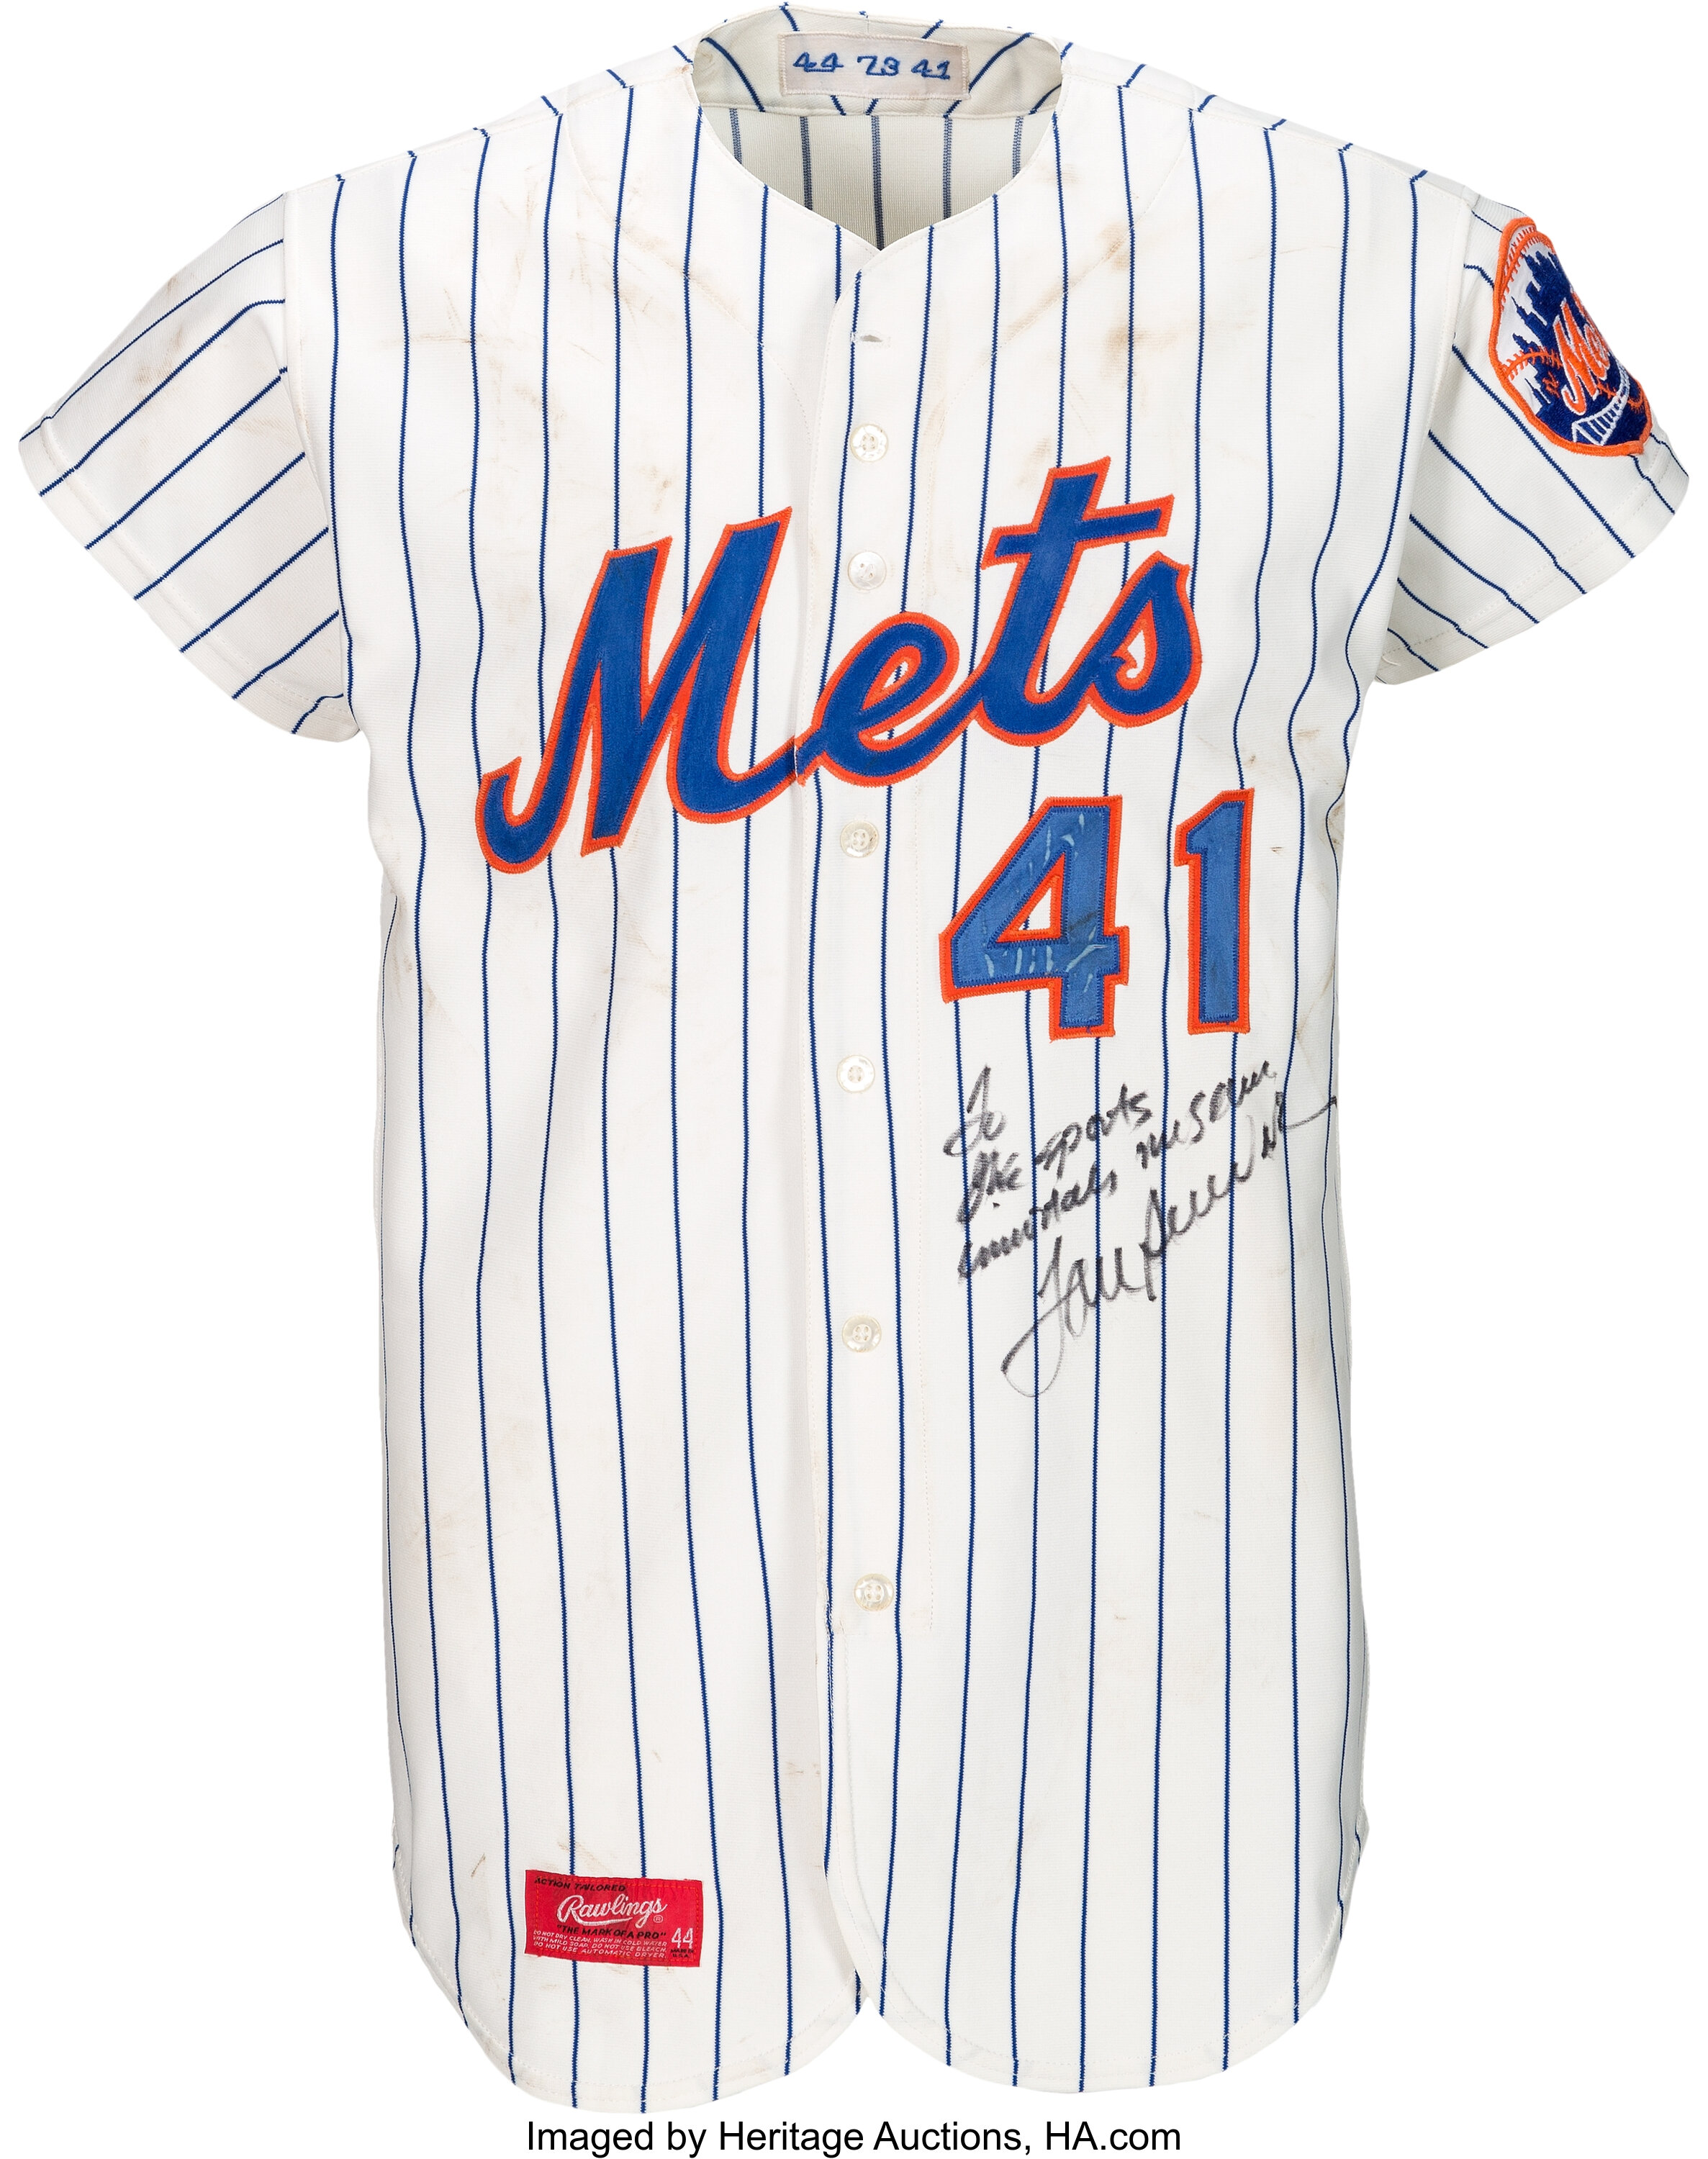 Tom Seaver Autographed Pinstriped New York Mets Jersey